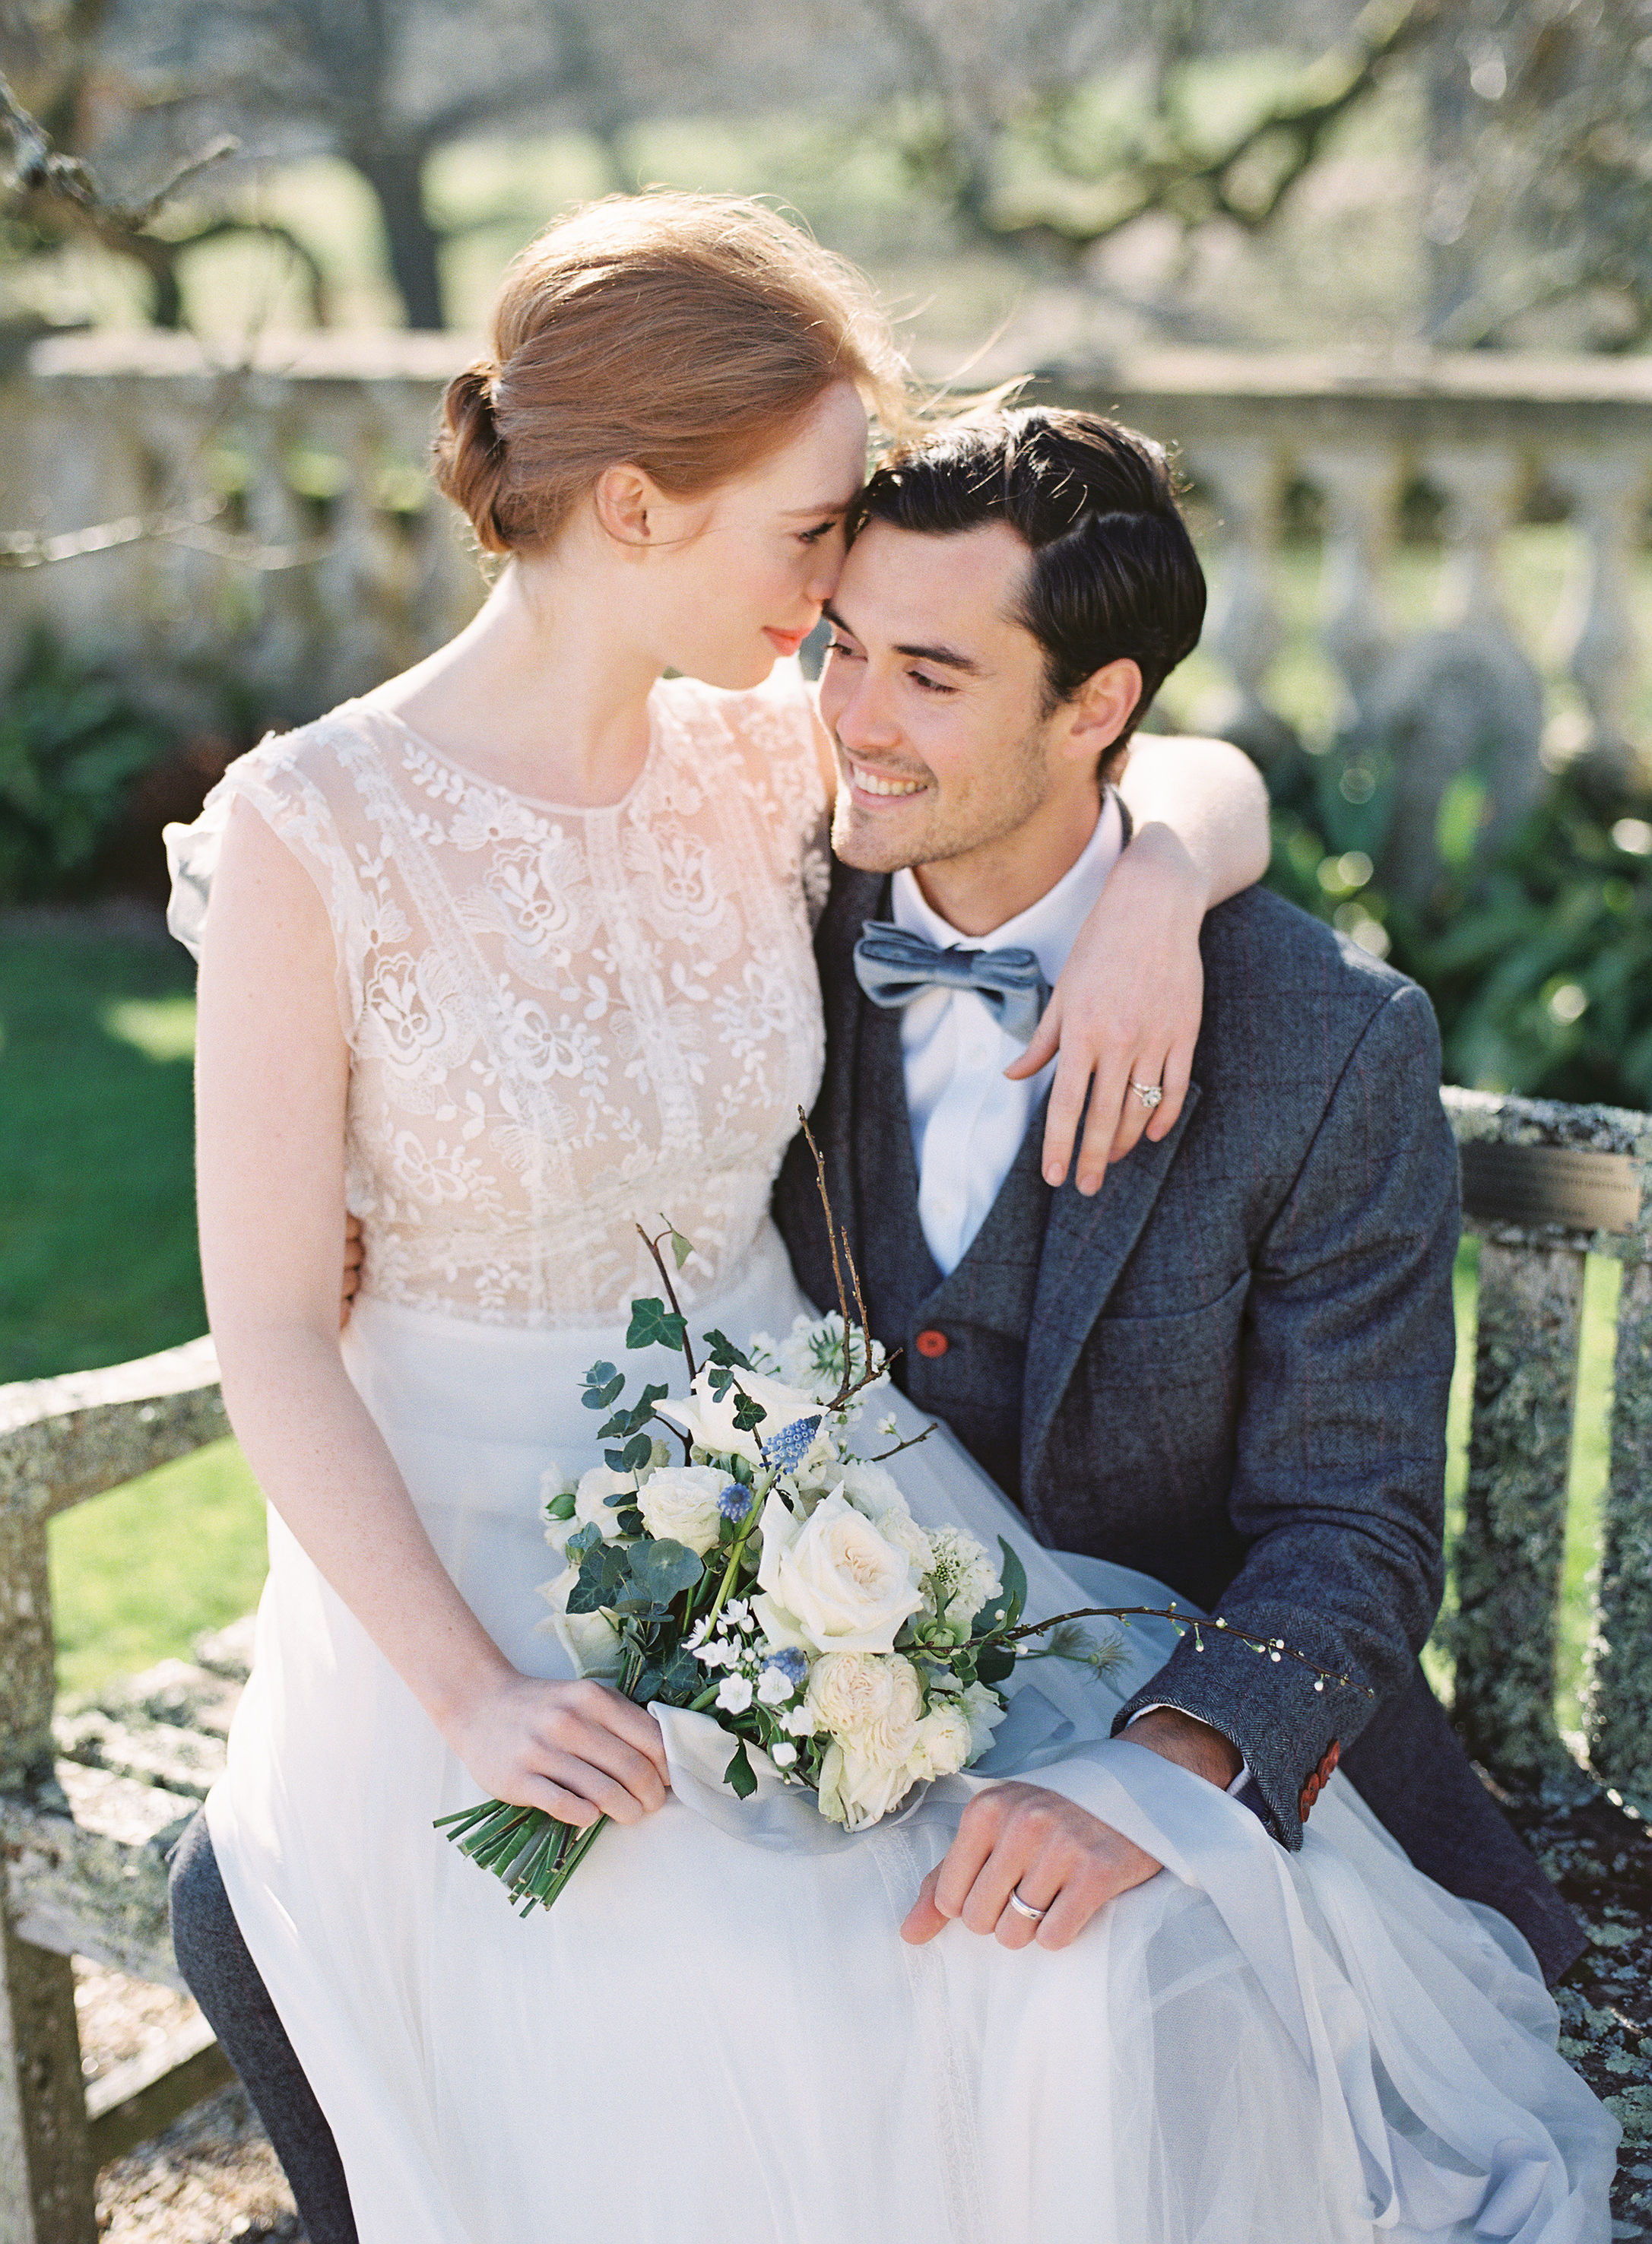 Romantic bridal couple portrait at Somerley House, Hampshire. Photo by Camilla Arnhold